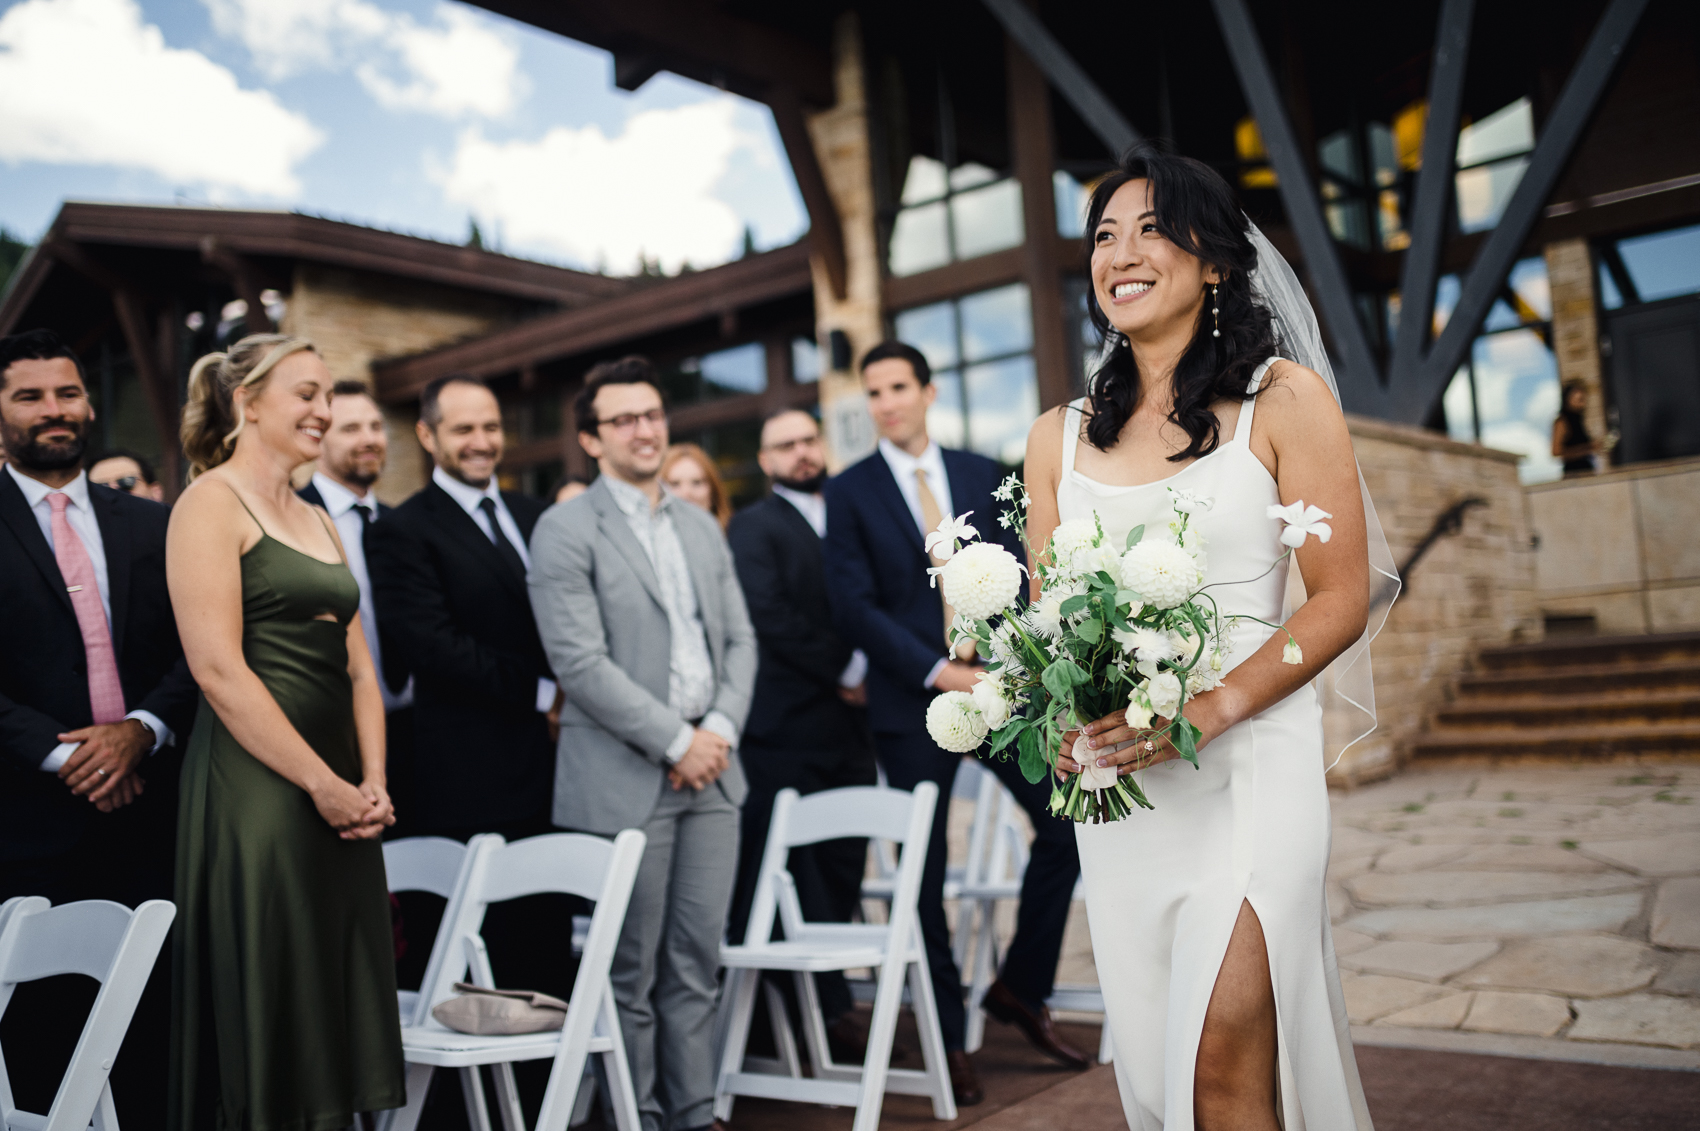 A stunning summer wedding ceremony at The 10th Vail, with the couple exchanging vows against a backdrop of breathtaking mountain views.